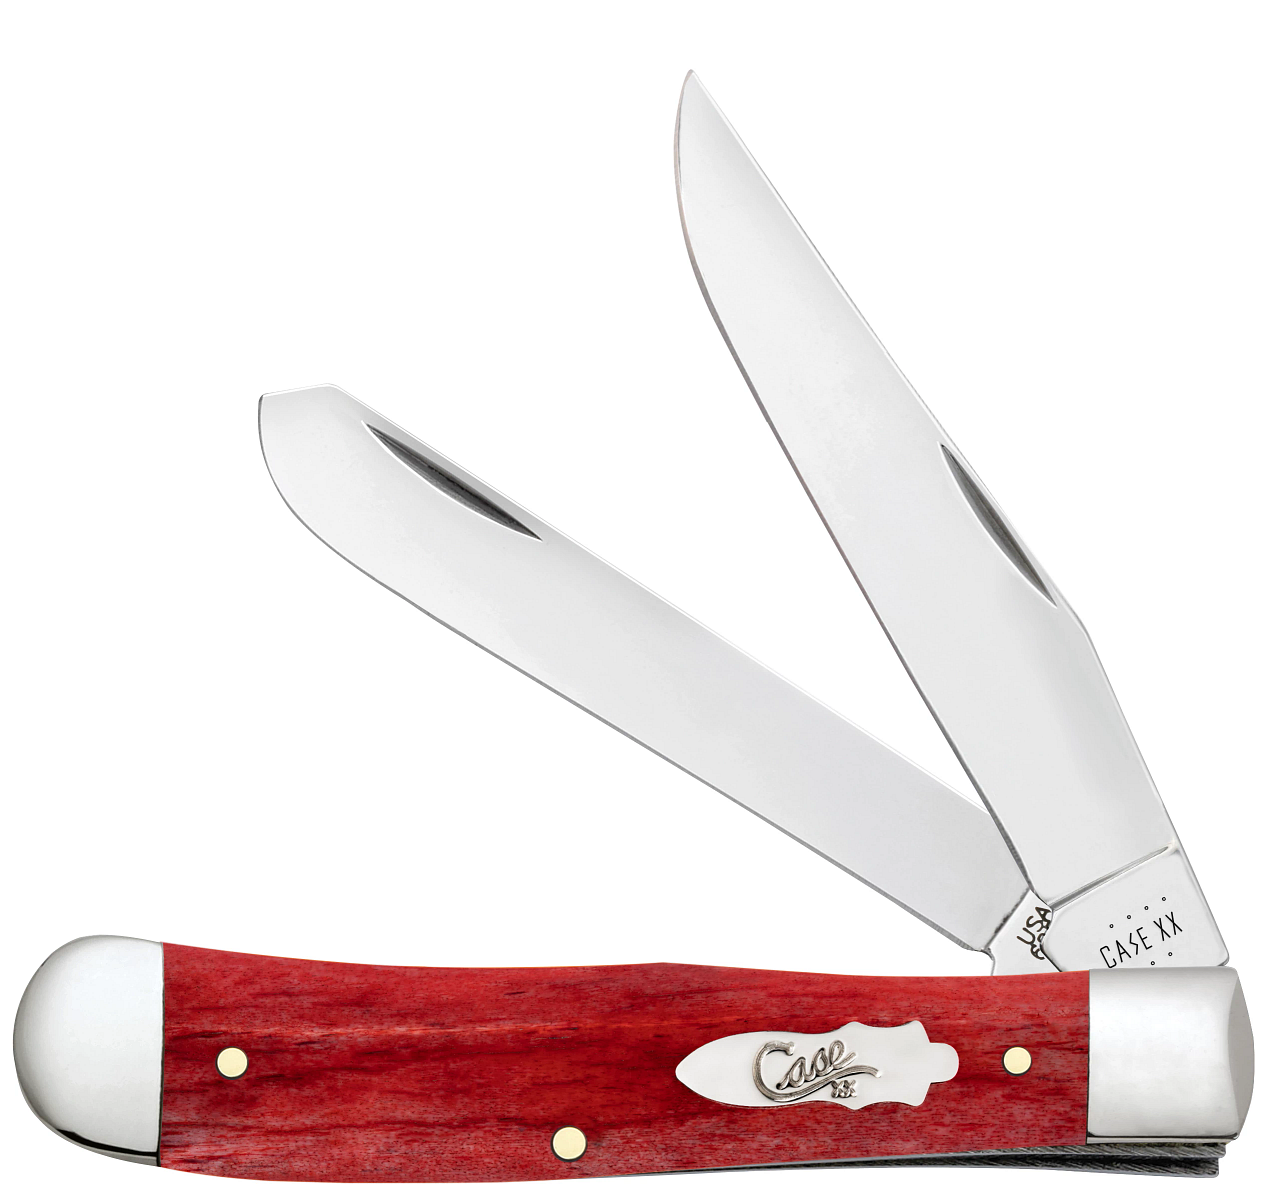 Case xx Smooth Old Red Bone Trapper Stainless 11320 Pocket Knife - CA11320  | 11320